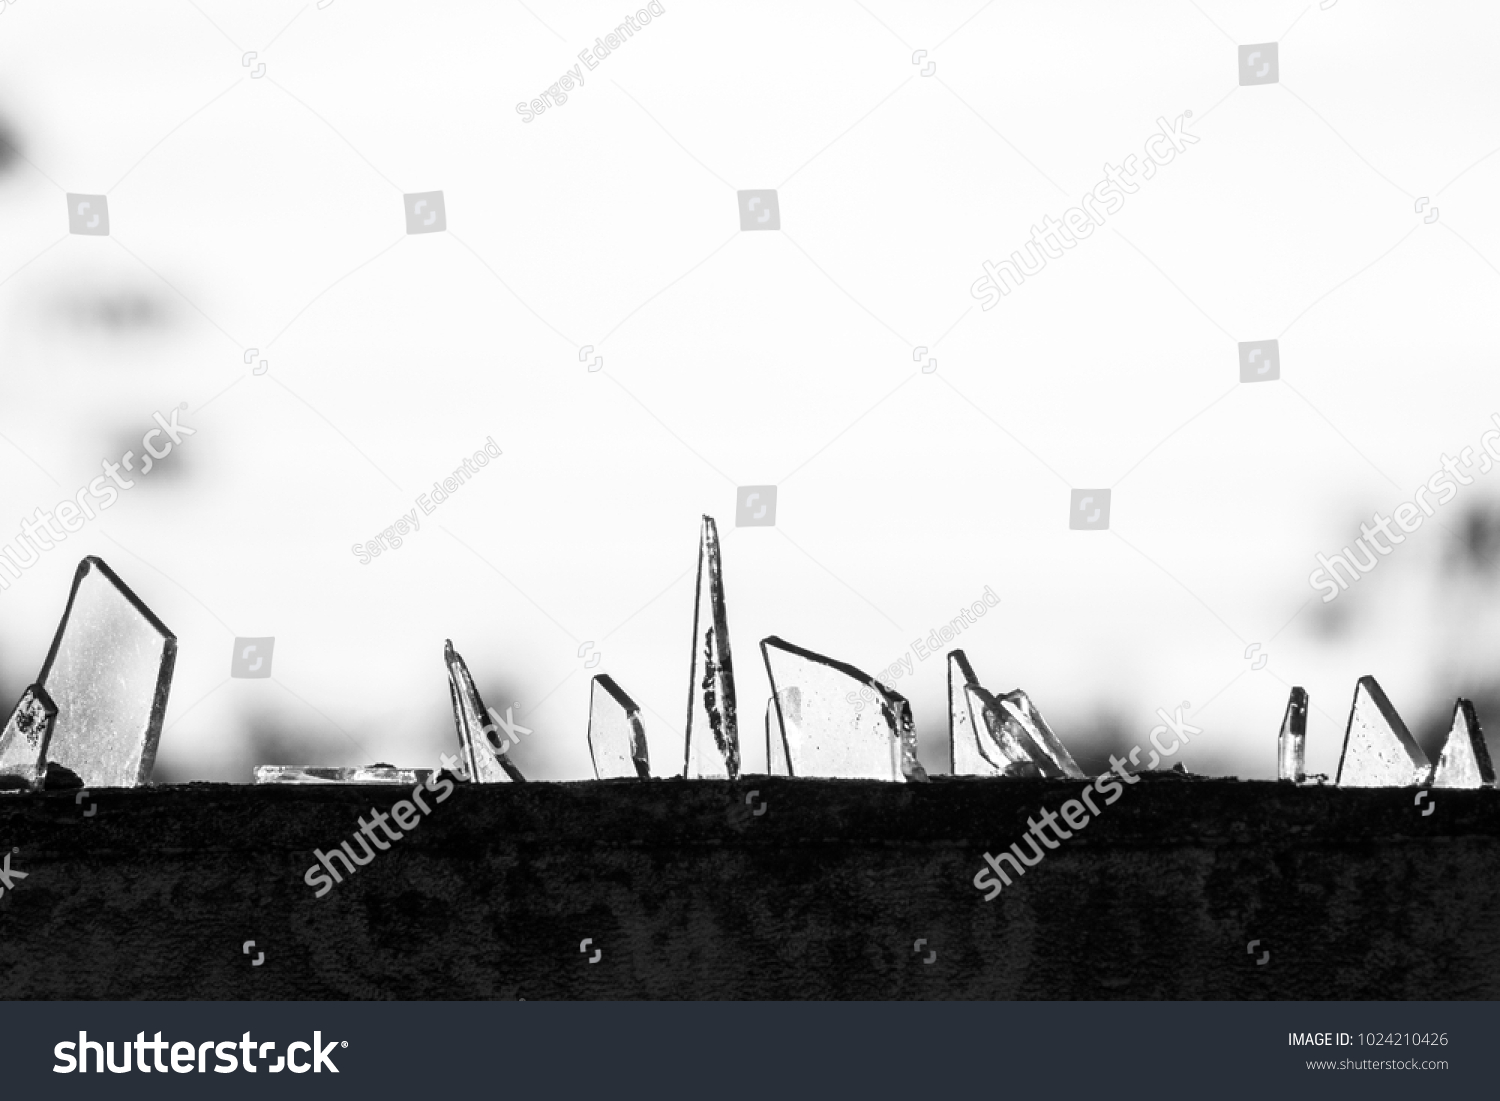 Glass Shards Used Protective Security Gate Stock Photo Edit Now 1024210426